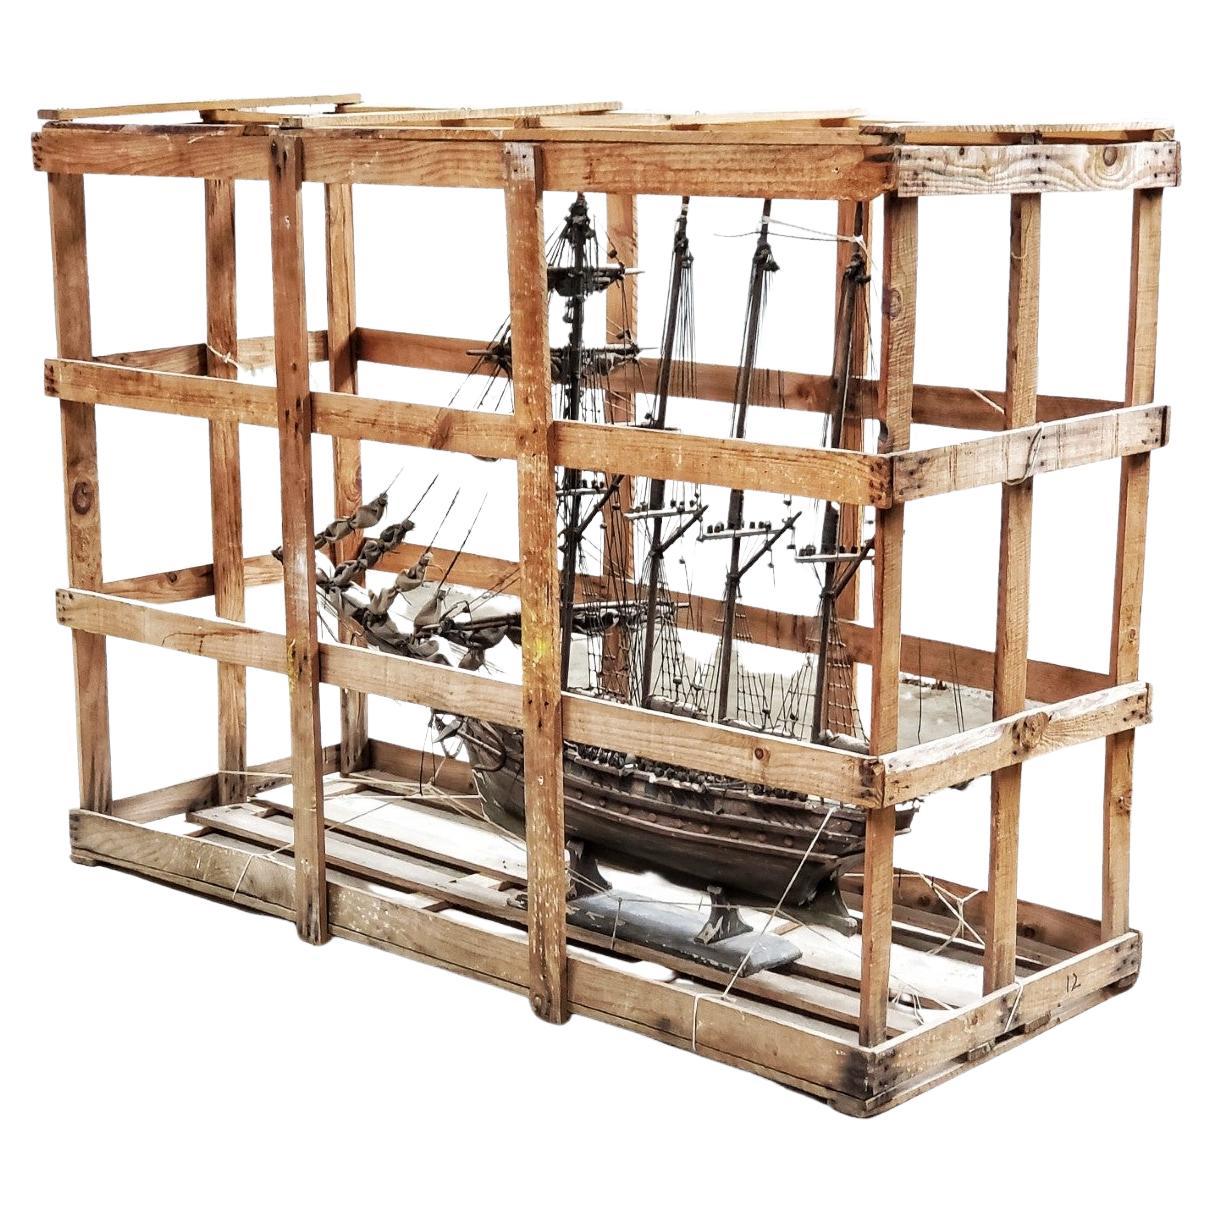 Late 19th Century Ship's Model in Crate art object